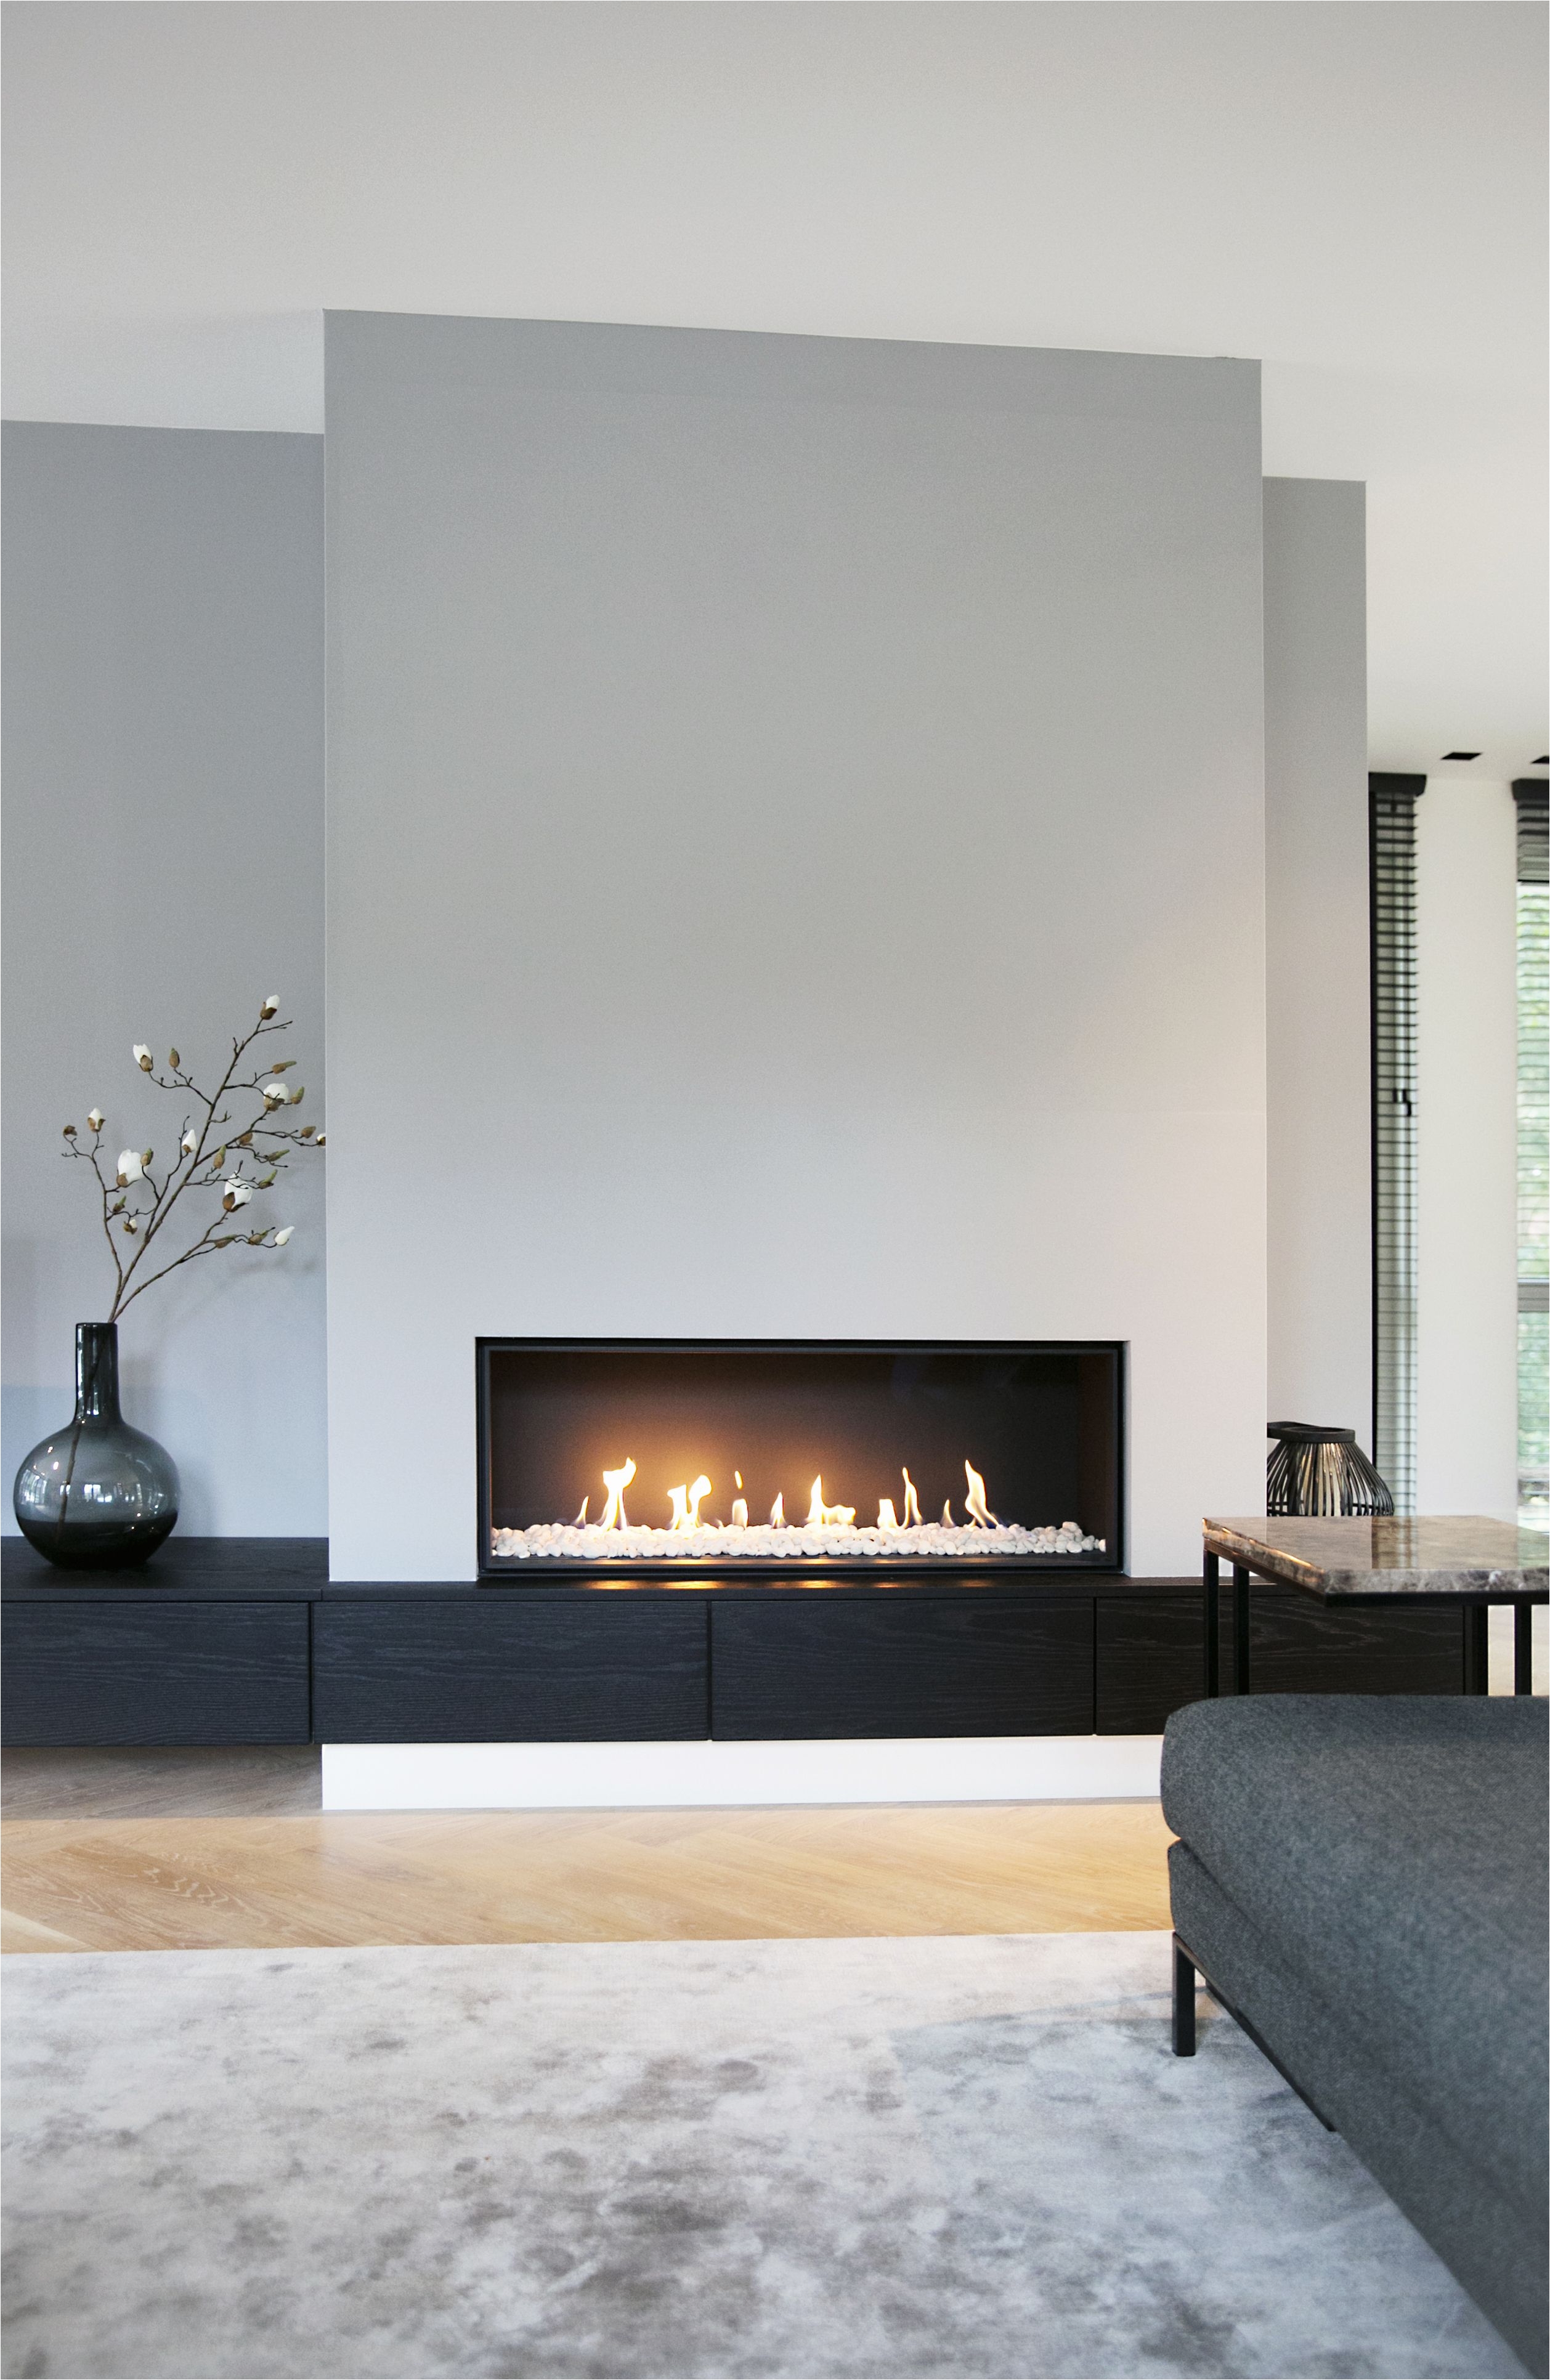 element 4 fireplace project interieur design by nicole fleur fireplace pinterest of element 4 fireplace